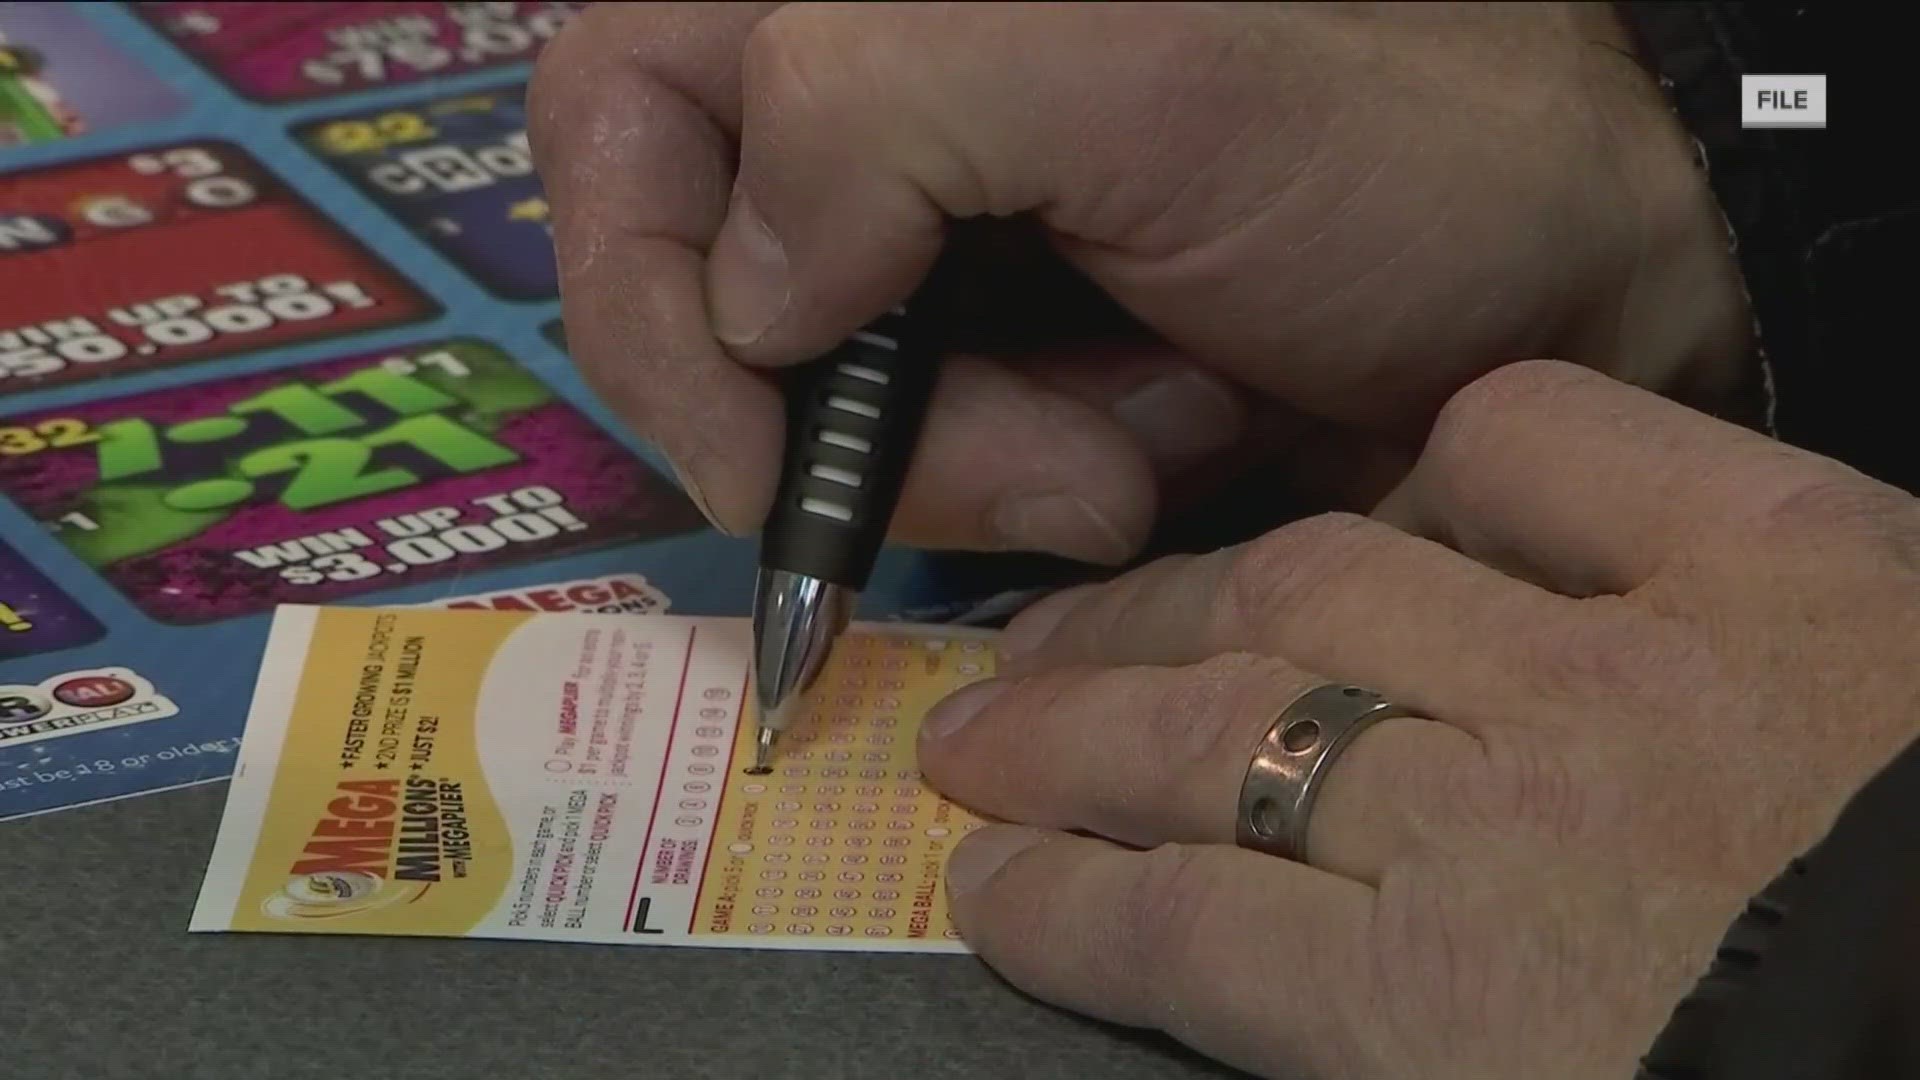 Each drawing without a winner pushes the prize closer to the record $2.04 billion Powerball jackpot that someone in California won last year.